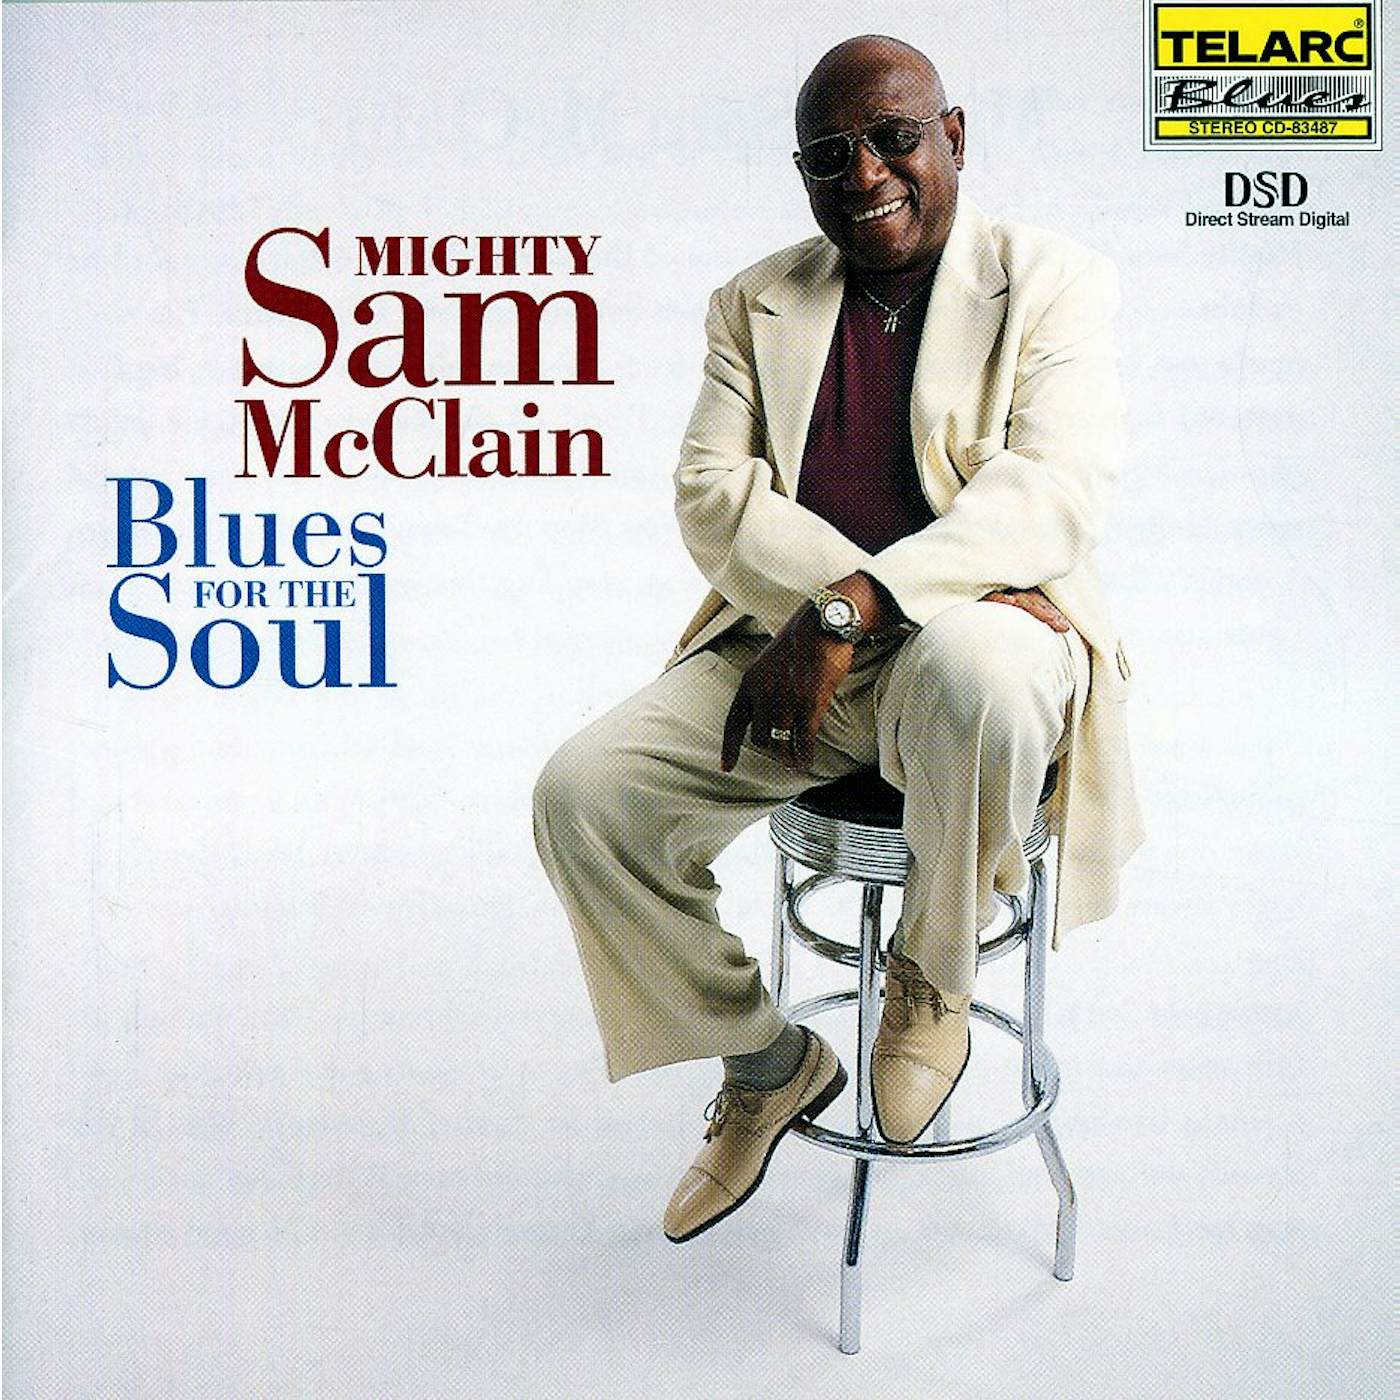 Mighty Sam McClain BLUES FOR THE SOUL CD